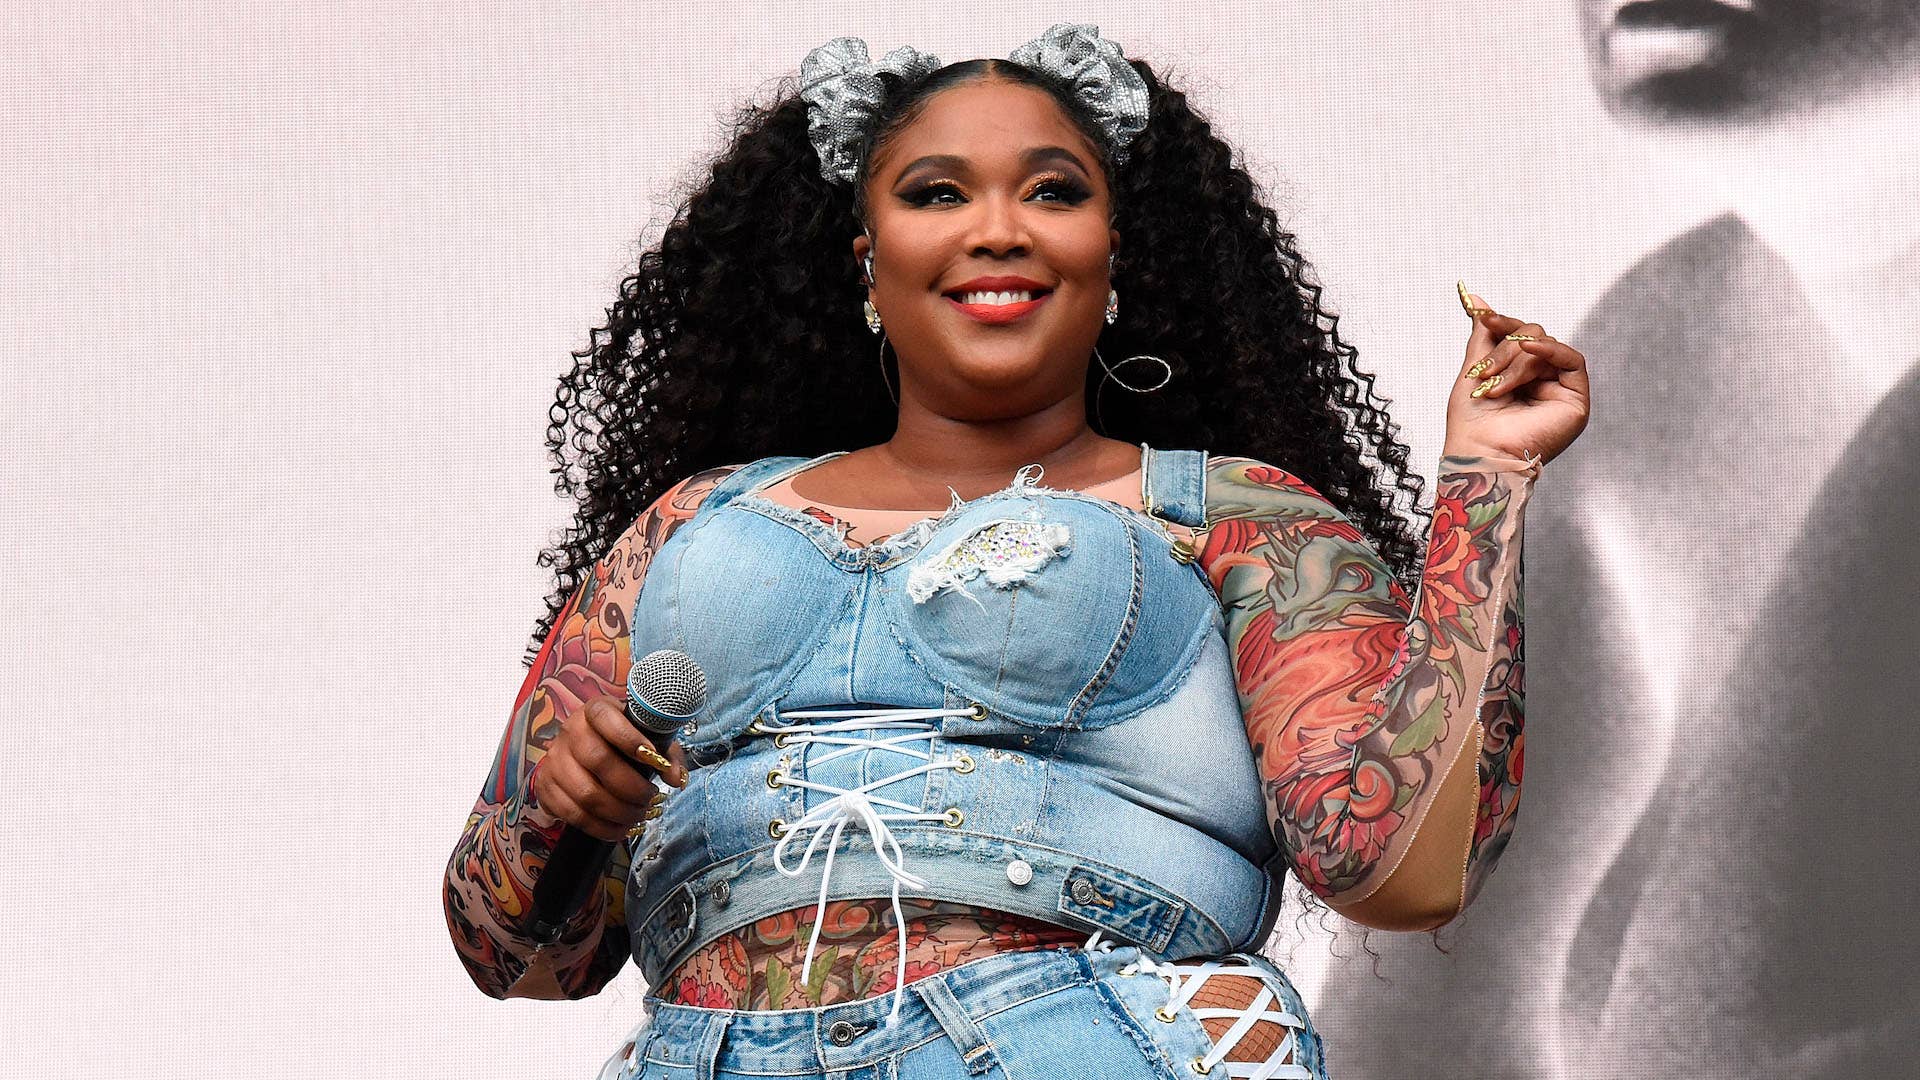 Lizzo performing at Made in America 2019